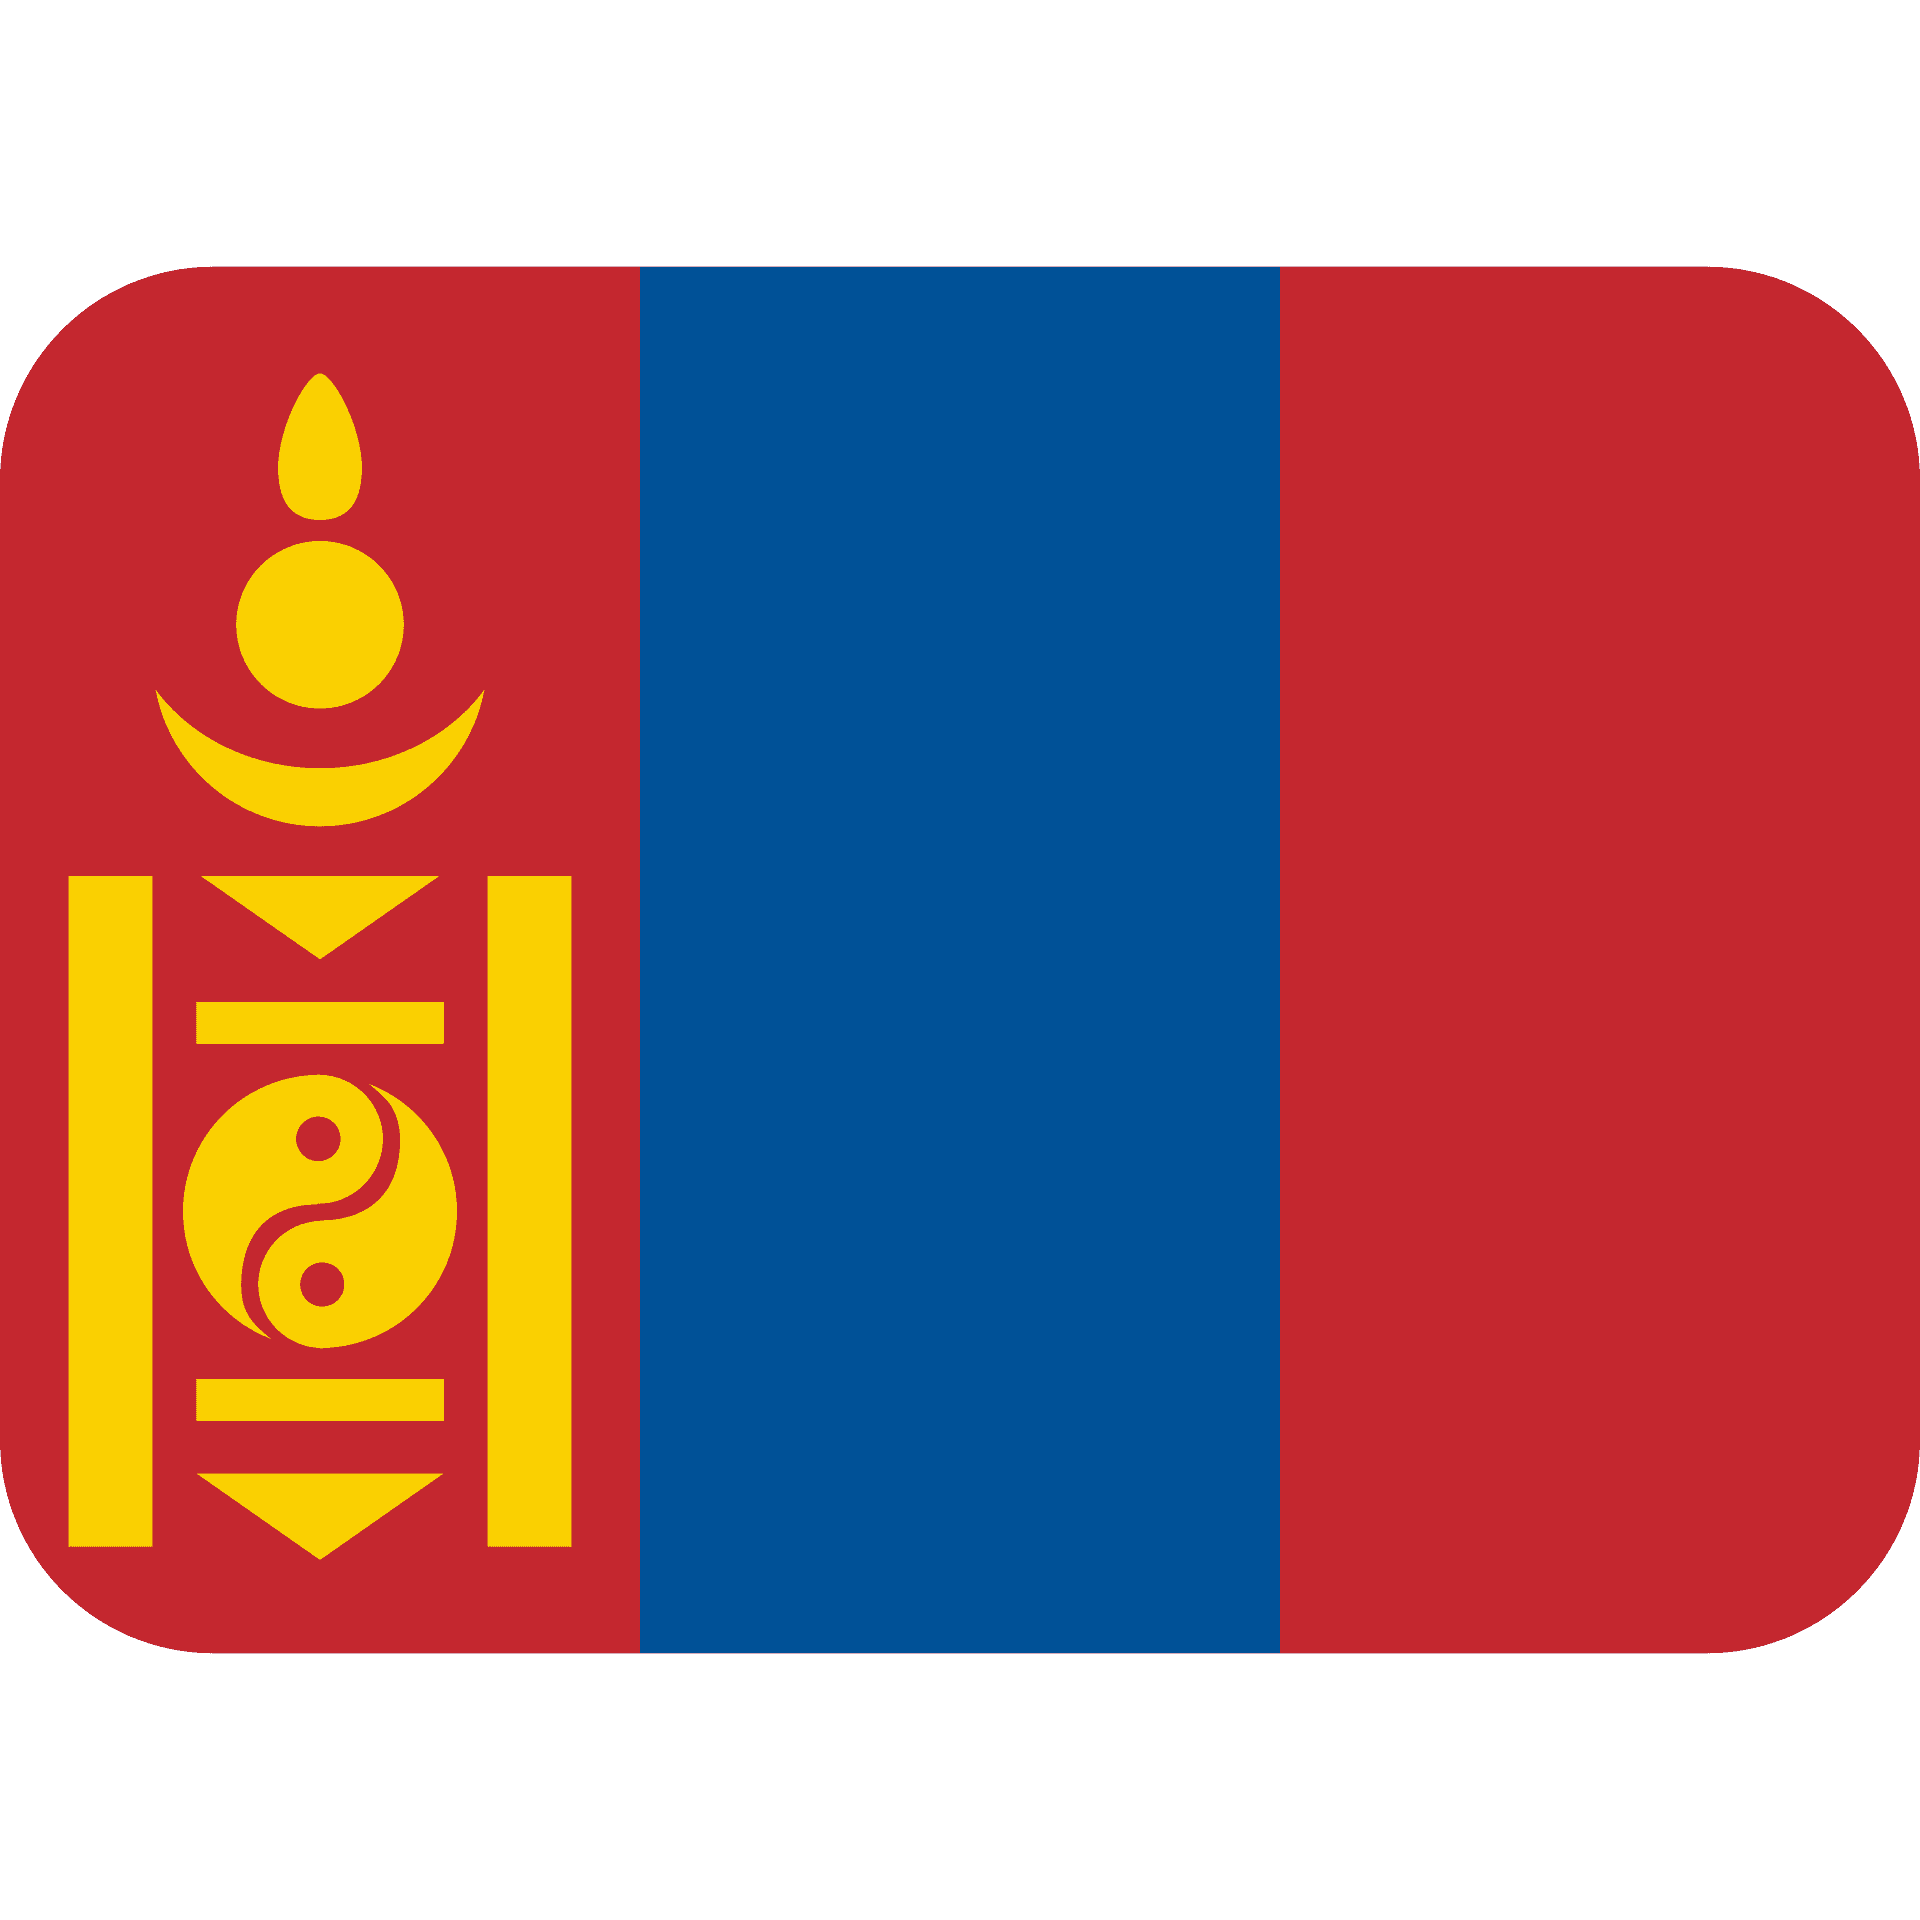 Mongolia Flag PNG Free Download